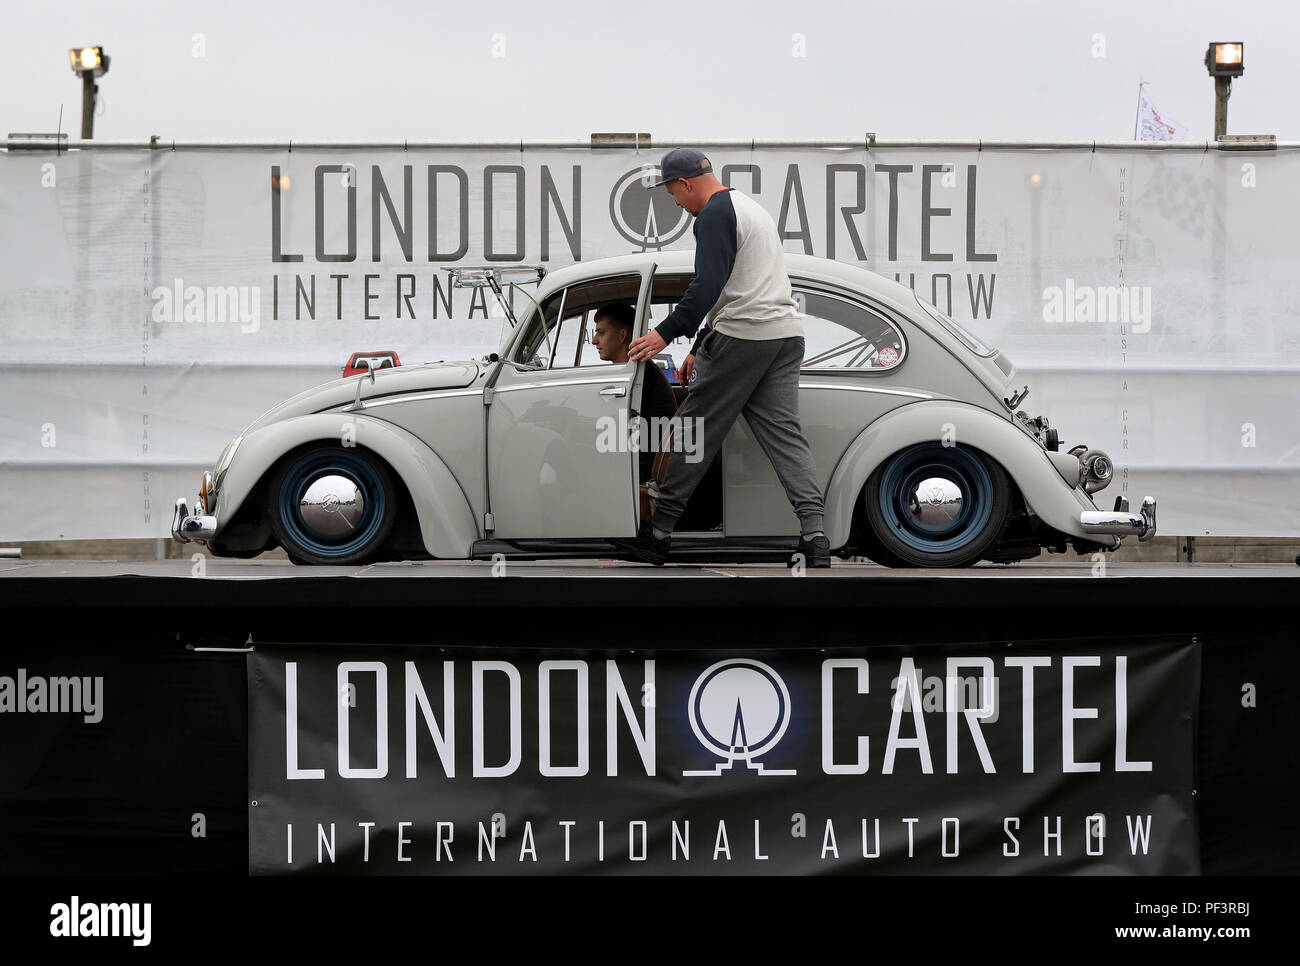 A Volkswagen Beetle on stage during the London Cartel International Auto Show, at the South of England Showground, West Sussex, where over 2000 classic and retro cars are being showcased. Stock Photo